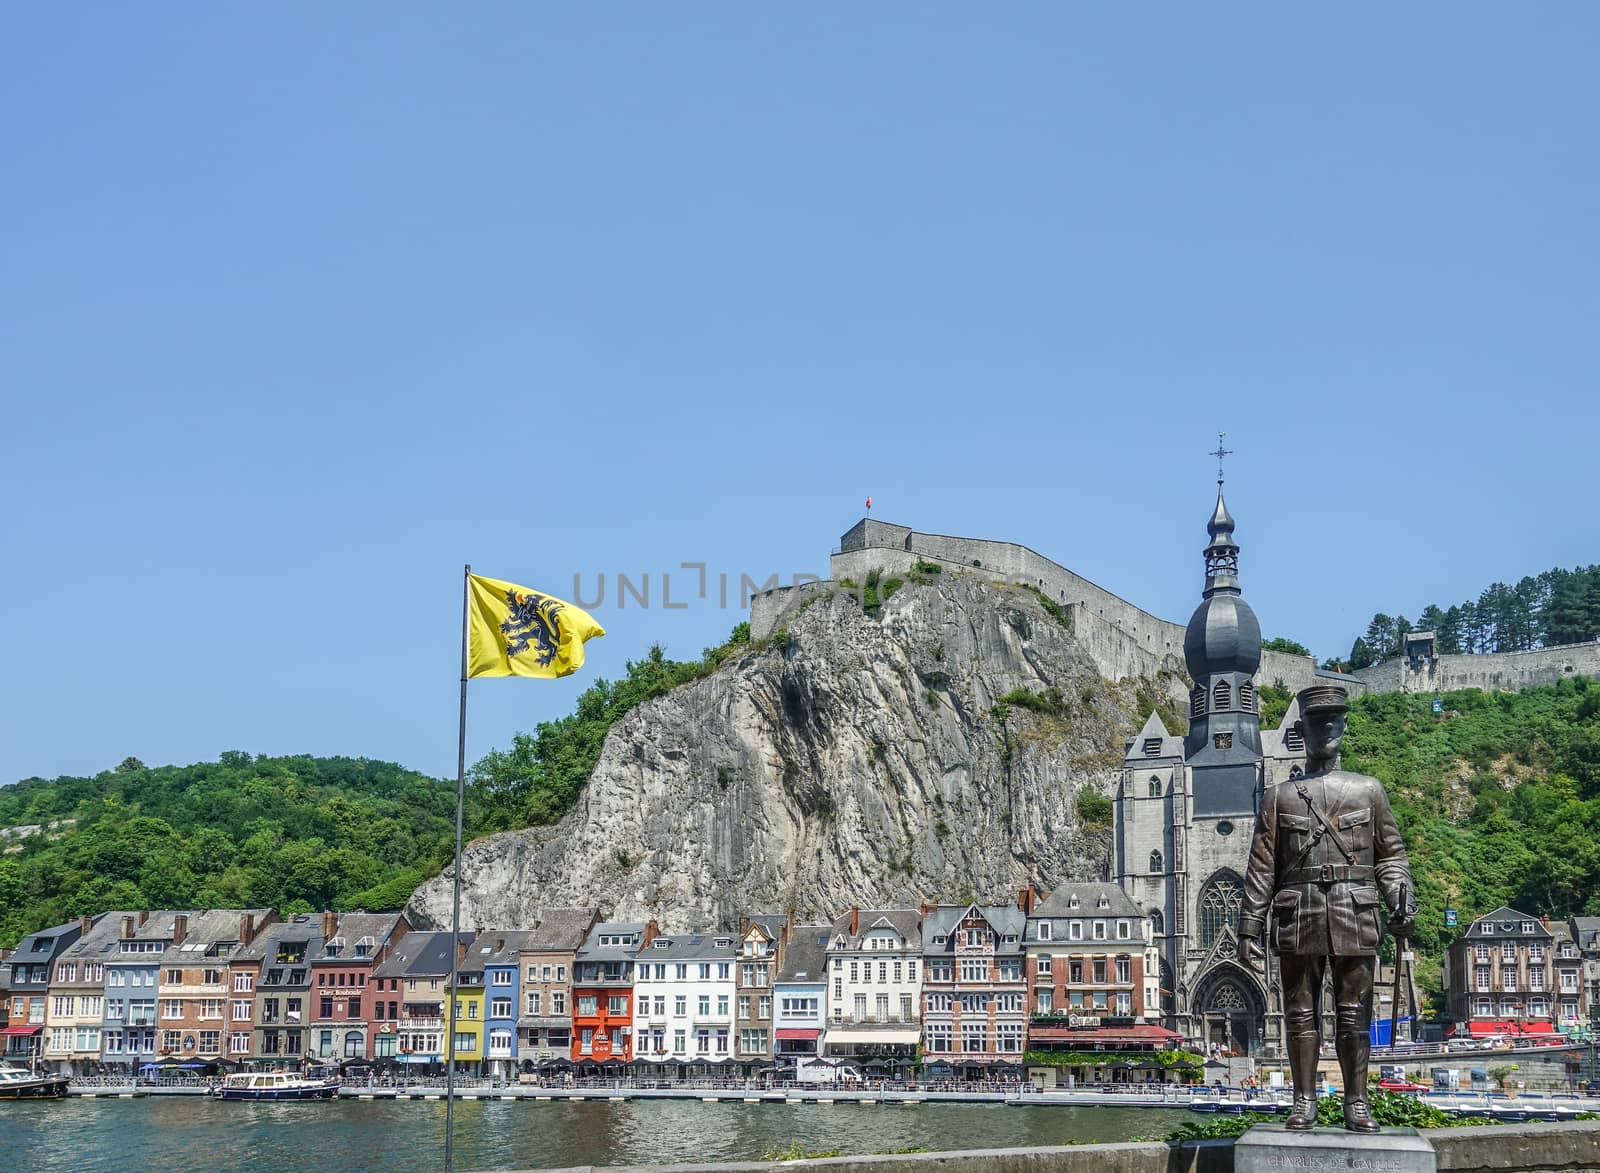 Dinant, Belgium - June 26, 2019: Flag of Flanders, Notre Dame church, Citadelle and Charles De Gaule statue on opposite banks of Meuse River, under blue sky. Green foliage. Multiple flags.